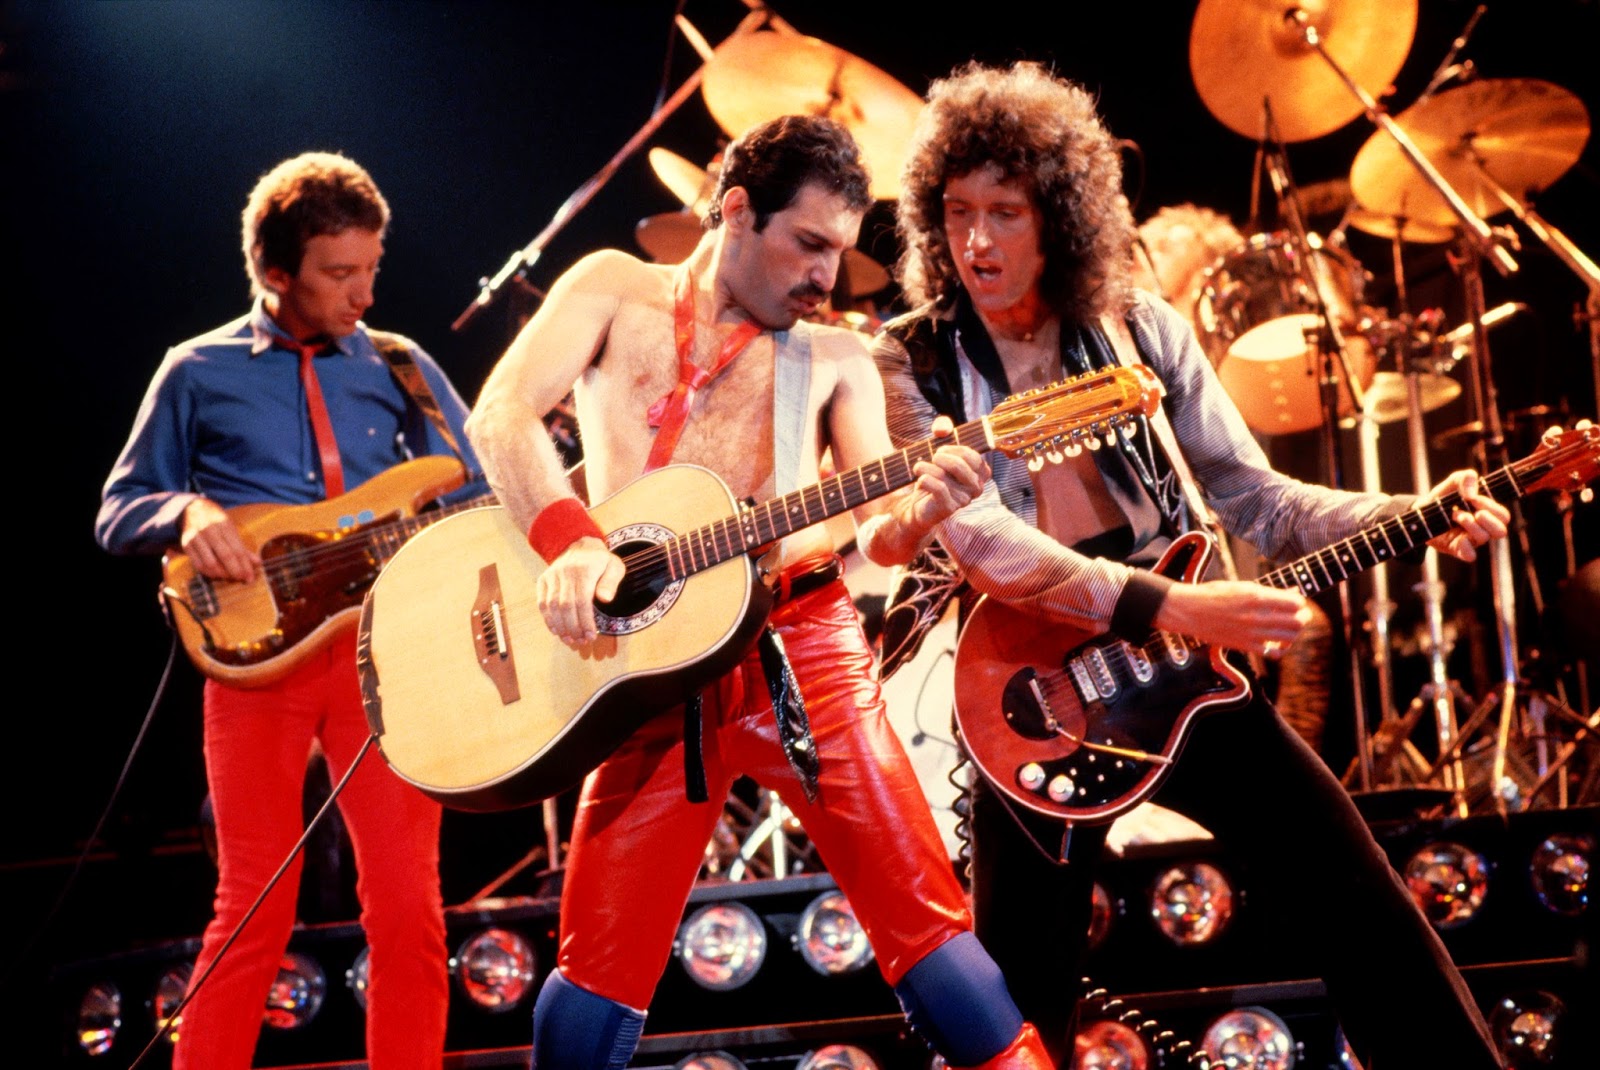 Freddie Mercury Died 25 Years Ago Today: 23 Amazing Facts About the